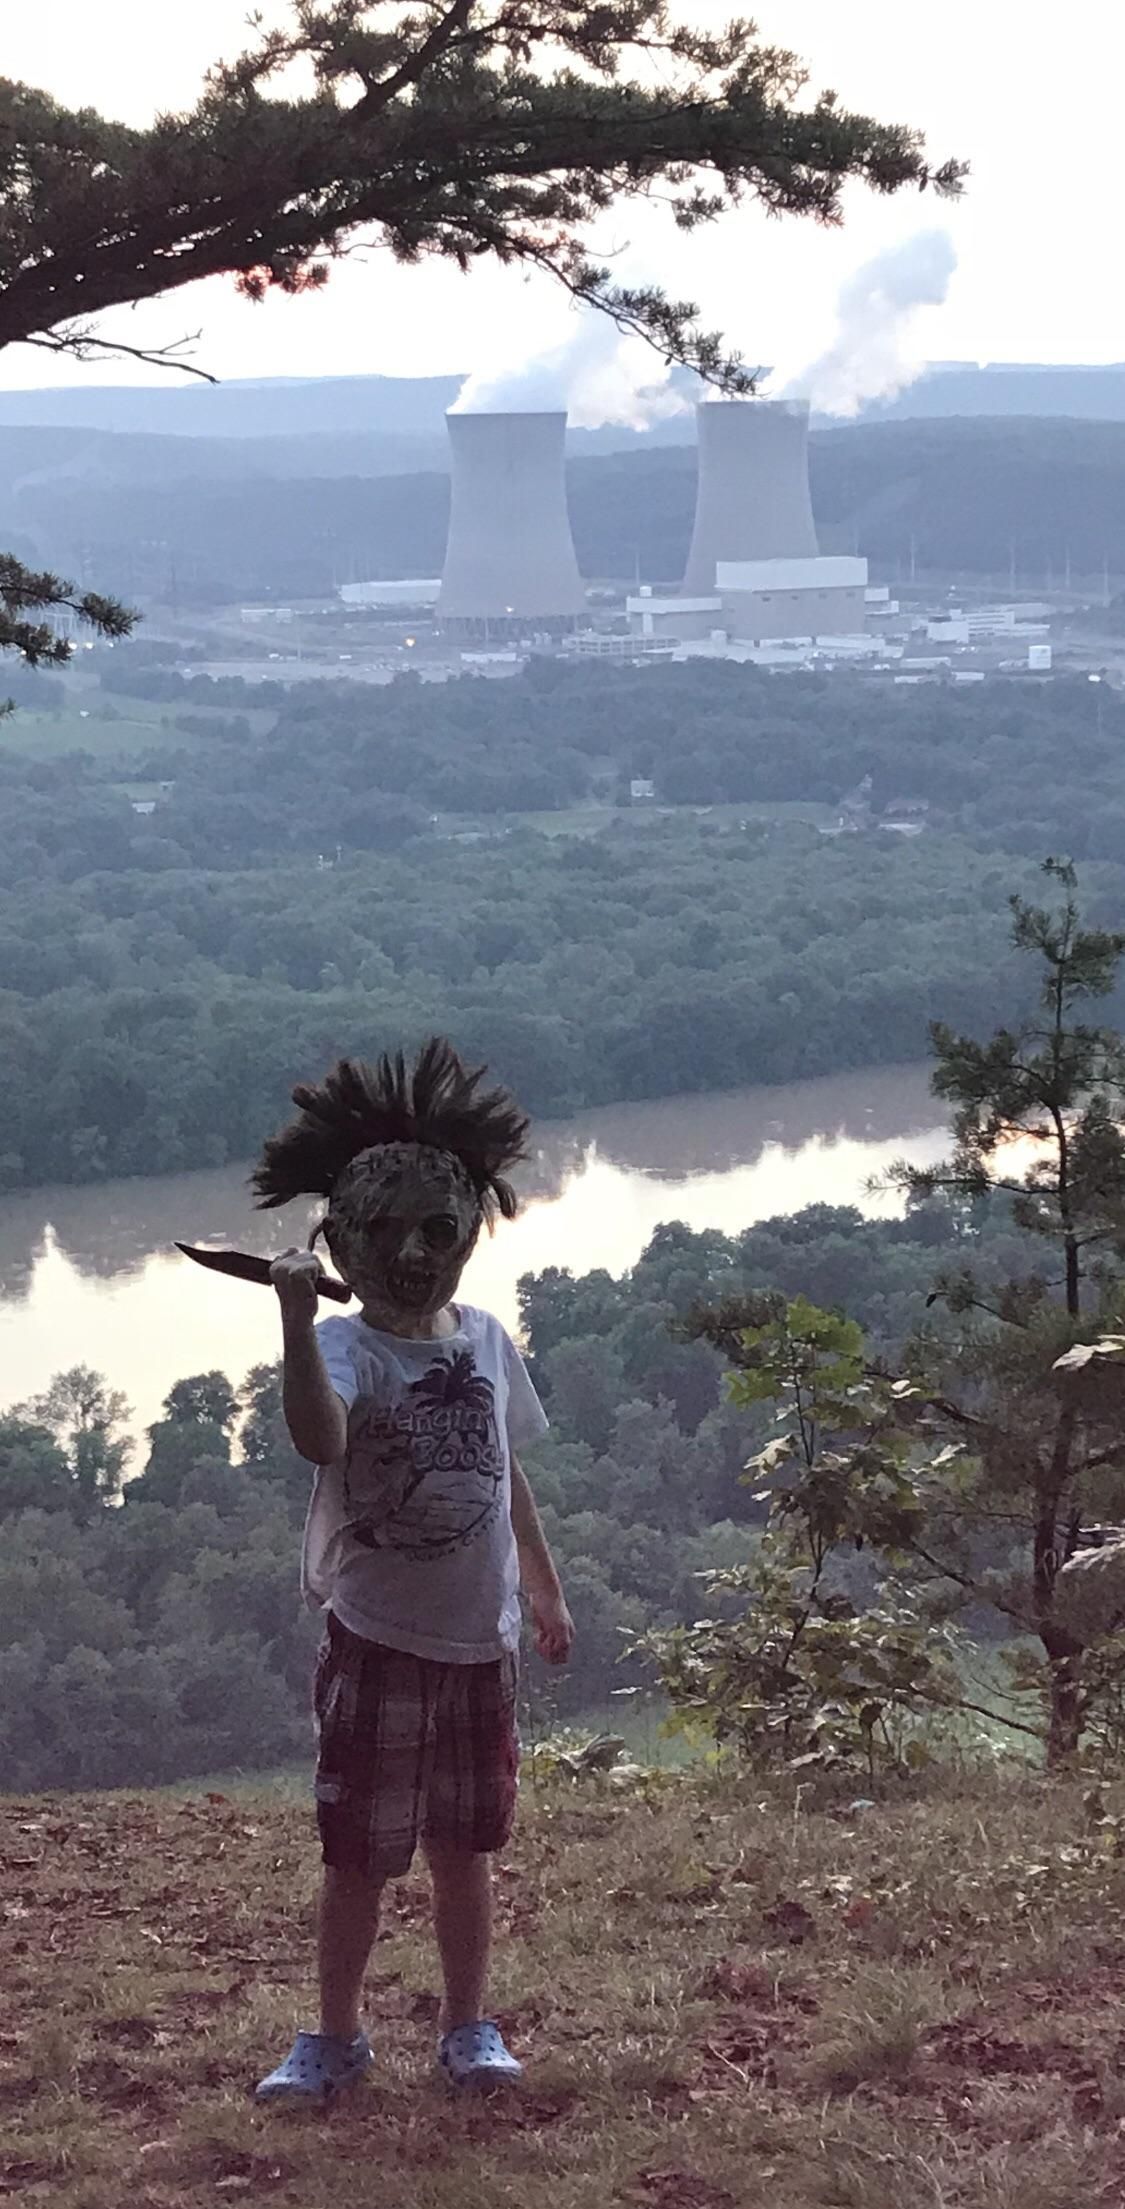 My four year old son brought his new Leatherface mask on the hike yesterday. Looks like he’s ready to wreak some havoc on the valley below.